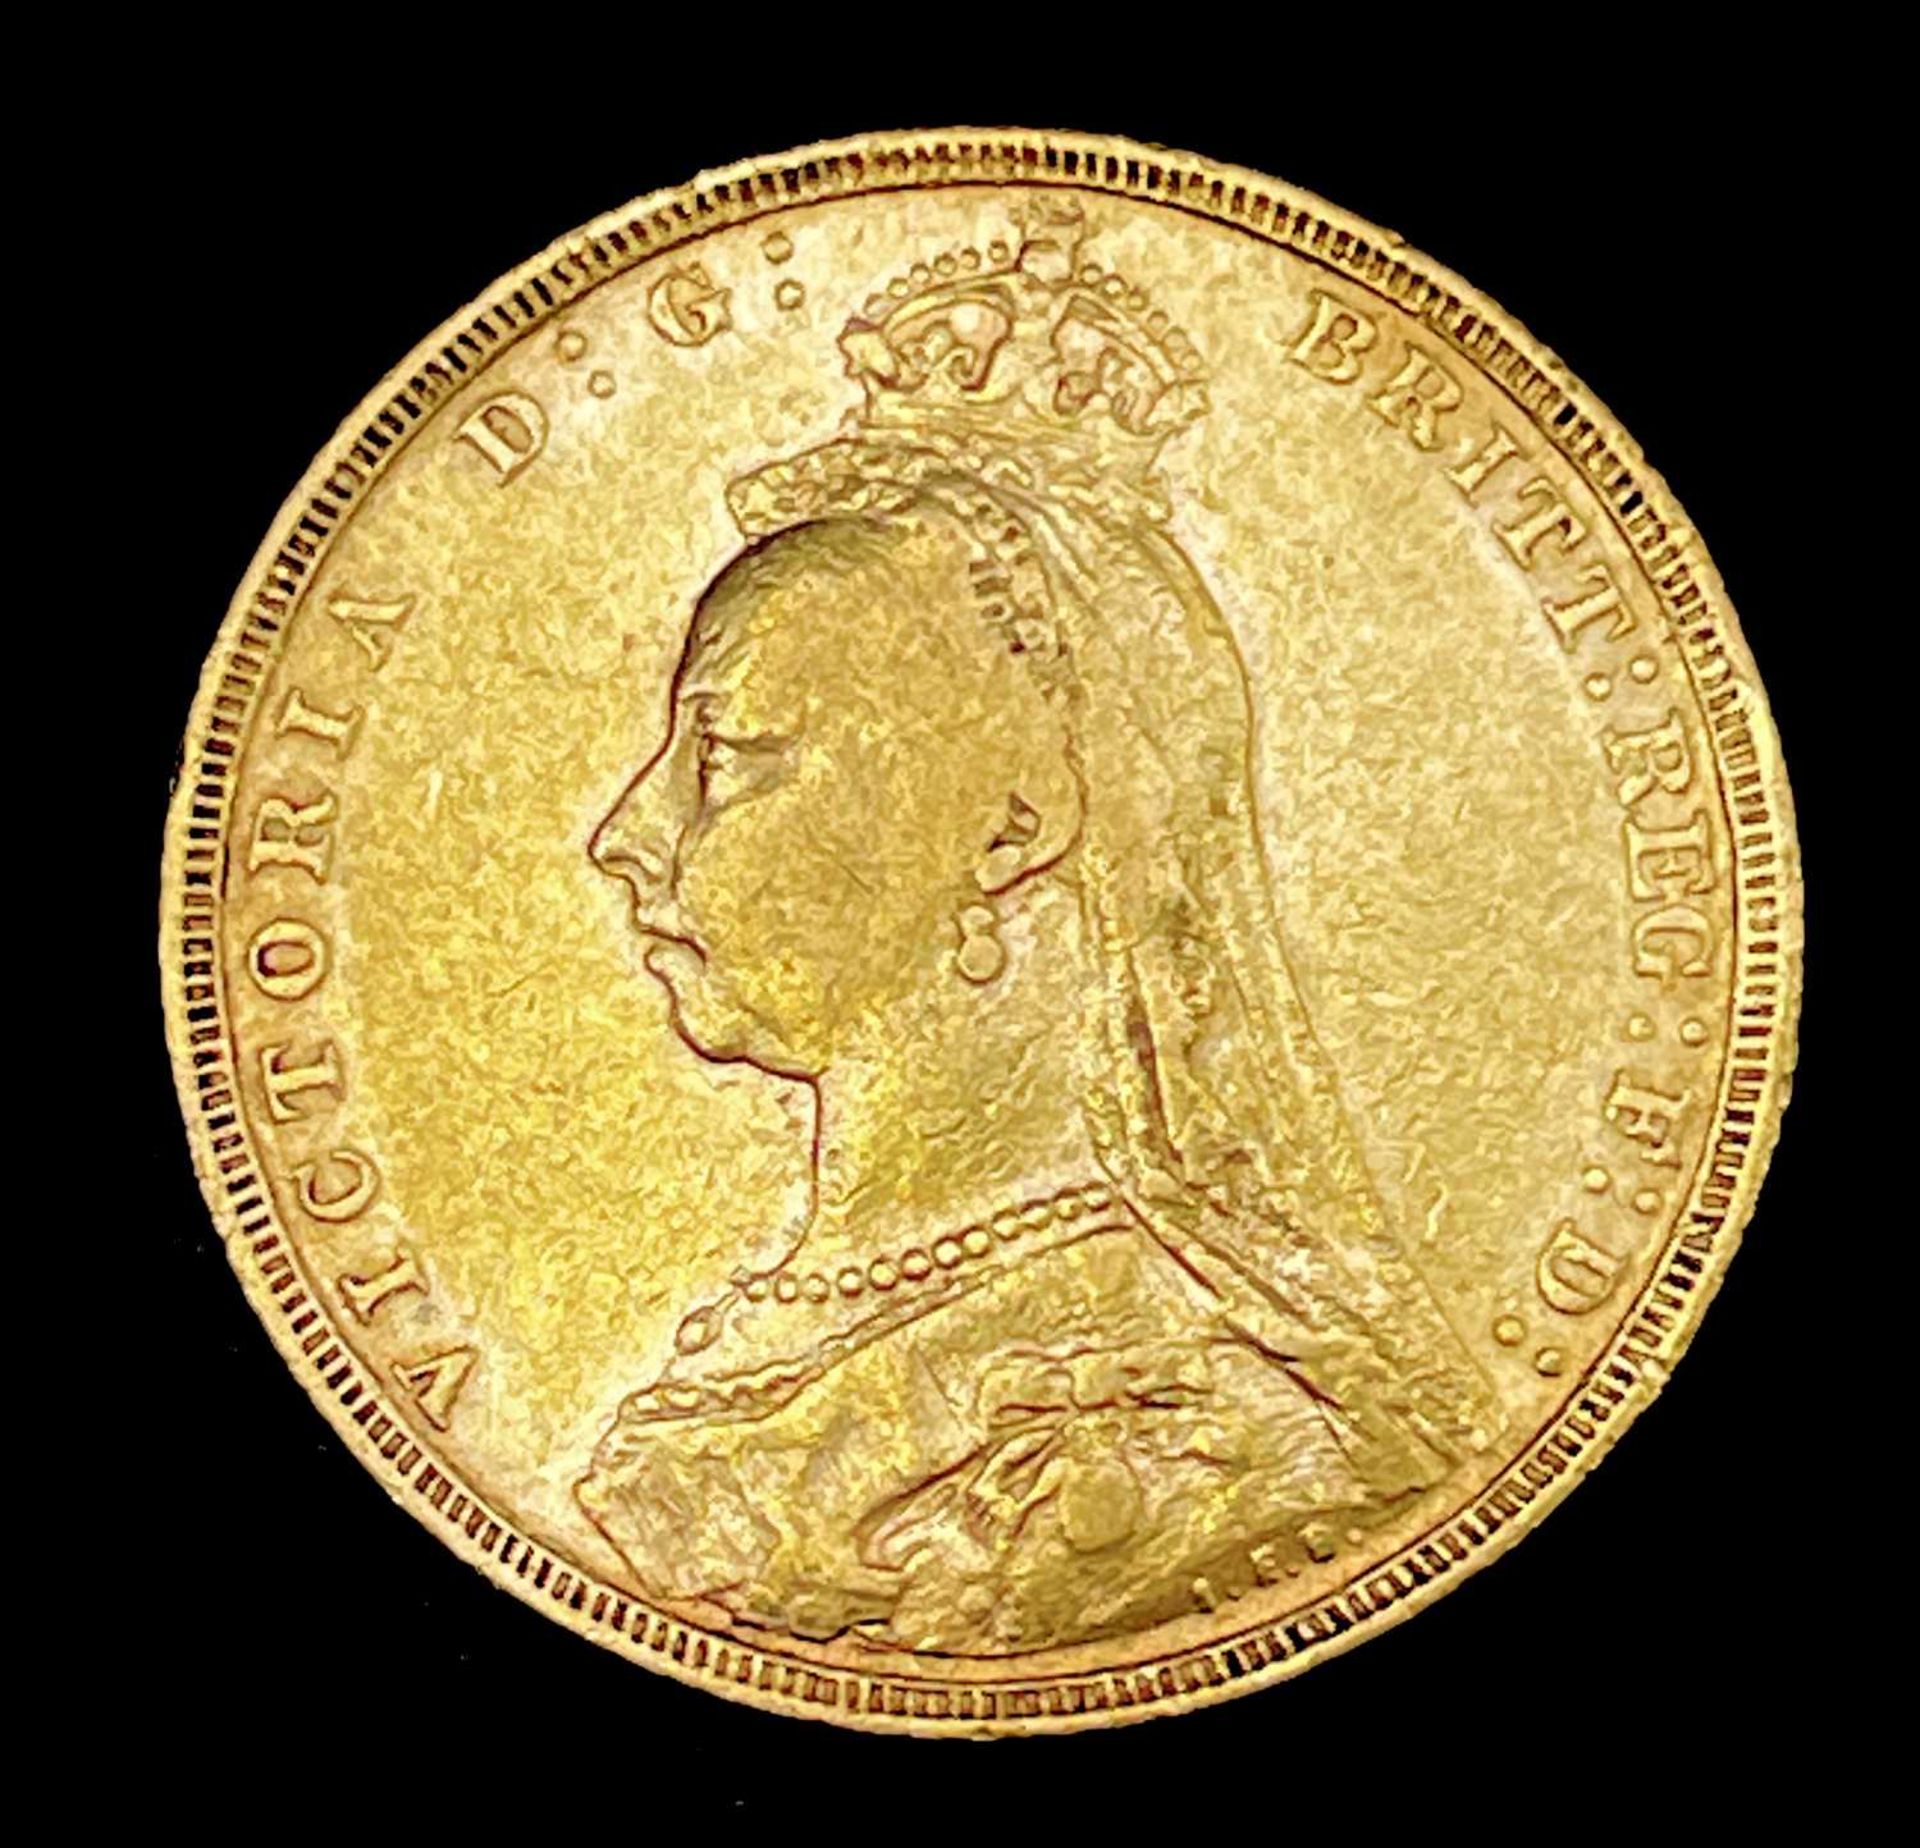 Great Britain Gold Sovereign 1888 Jubilee Head Condition: please request a condition report if you - Image 2 of 4